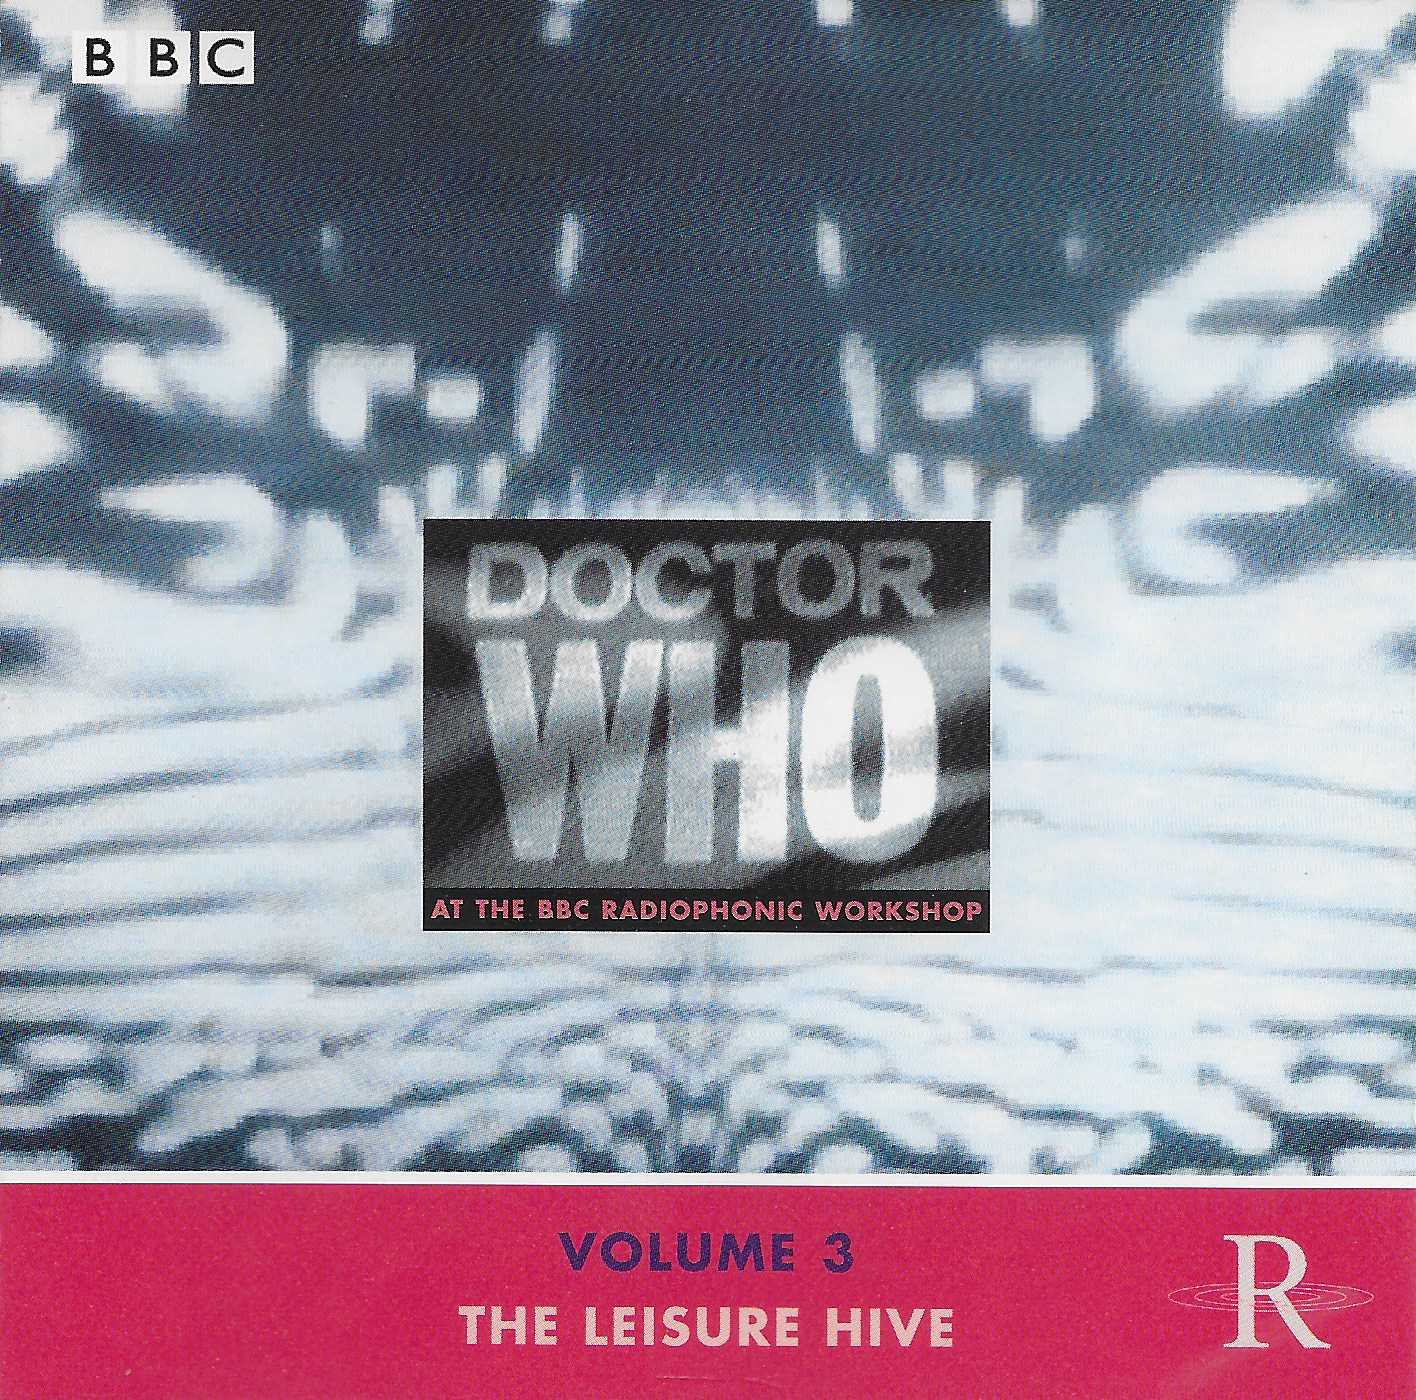 Picture of WMSF 6052-2 Doctor Who - At the radiophonic workshop - Volume 3 - The Leisure Hive by artist Peter Howell / Dick Mills / Delia Derbyshire / Ron Grainer from the BBC records and Tapes library